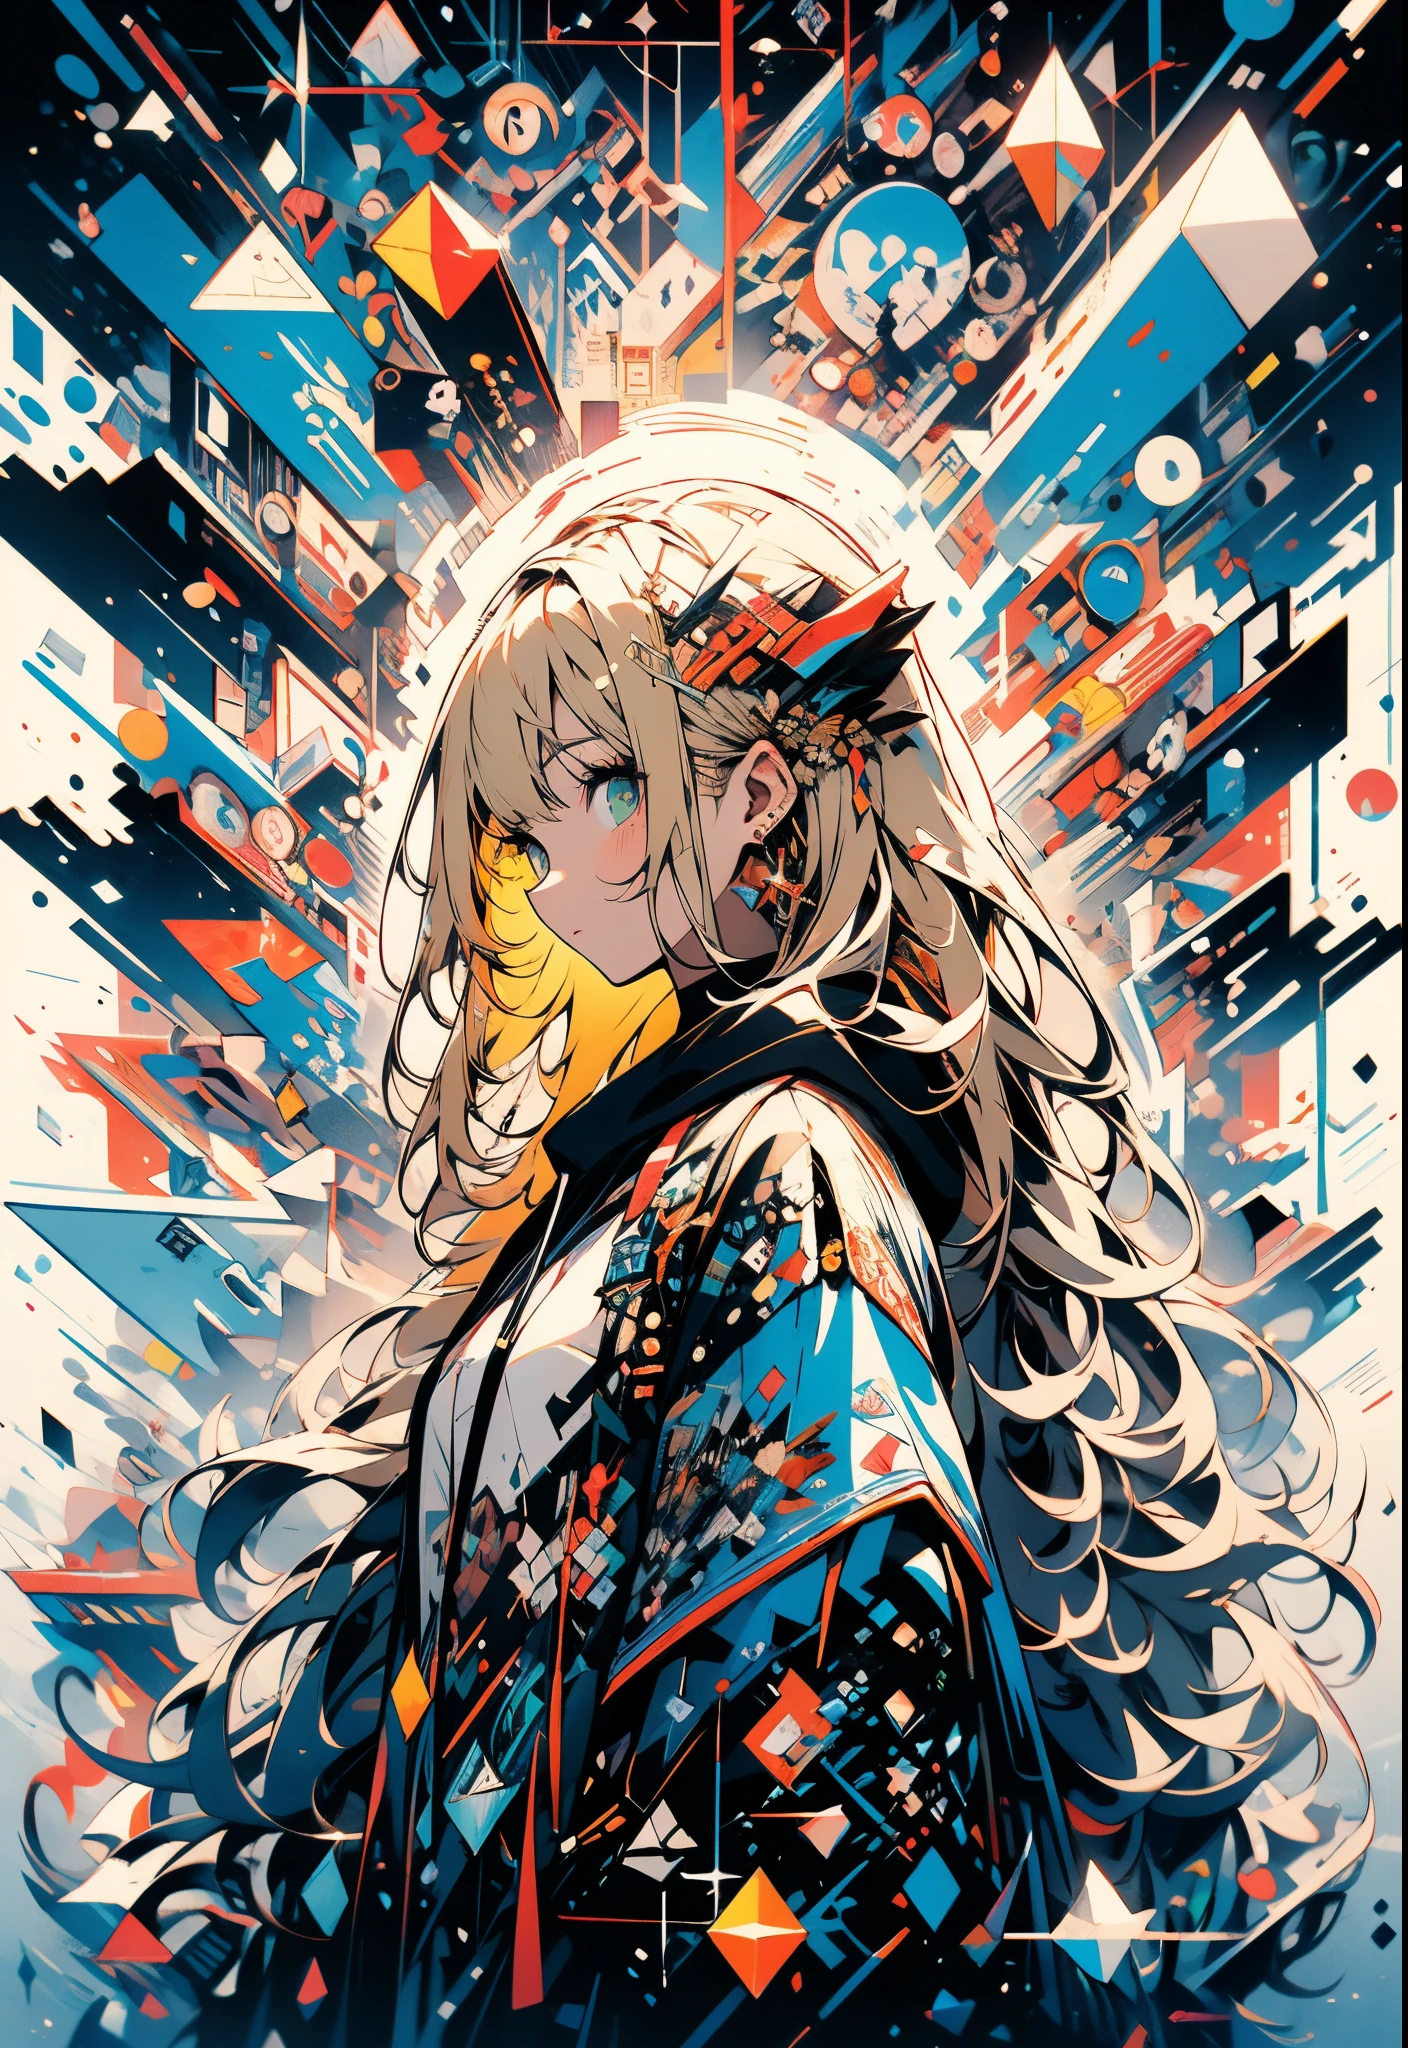 masterpiece, (beautiful and aesthetic:1.5), surrealism, highly detailed, anime, a side view painting of 1girl, wearing multicolored hoodie, blonde long hair, green eyes, red and dark blue color pallet, hard brush, gradient binary code effect, minimalist low poly collage illustration, paintings effect, heavy inking, featured on pixiv, saturated colors, hypercube, pixelsort, epic composition, epic proportion, dynamic lighting, HD